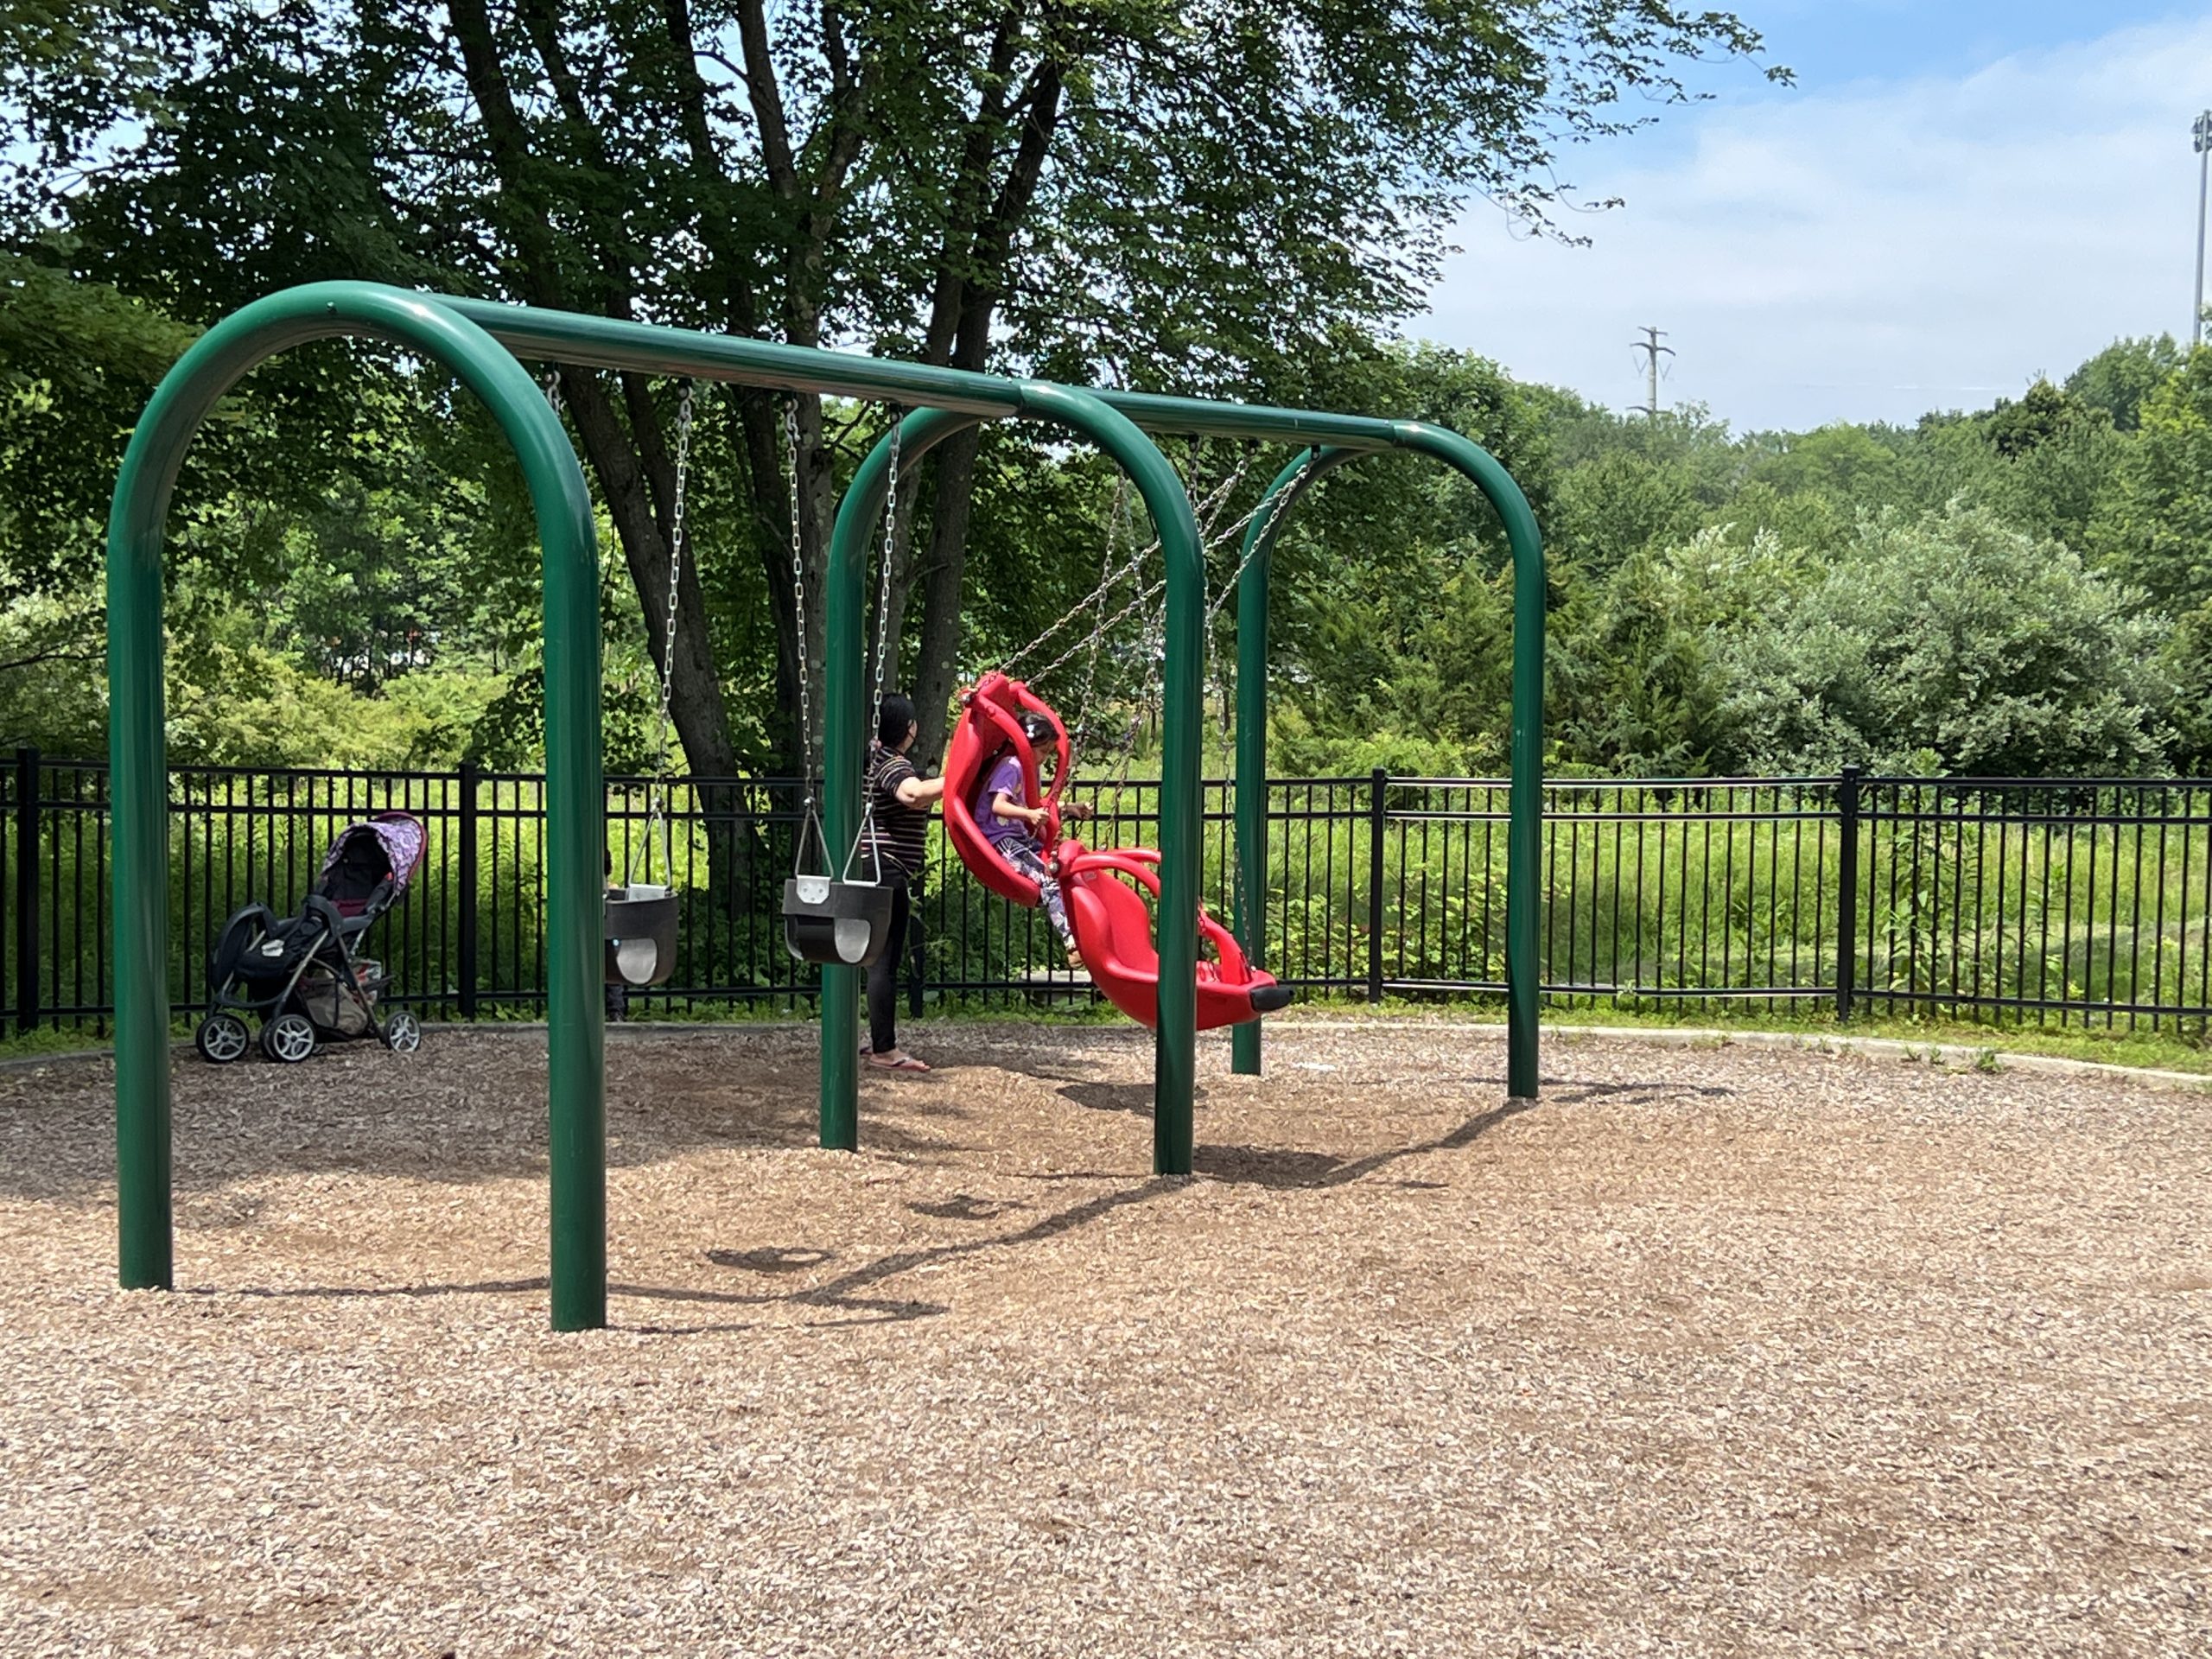 Montville Community Playground in Montville NJ SWINGS baby and accessible uSE